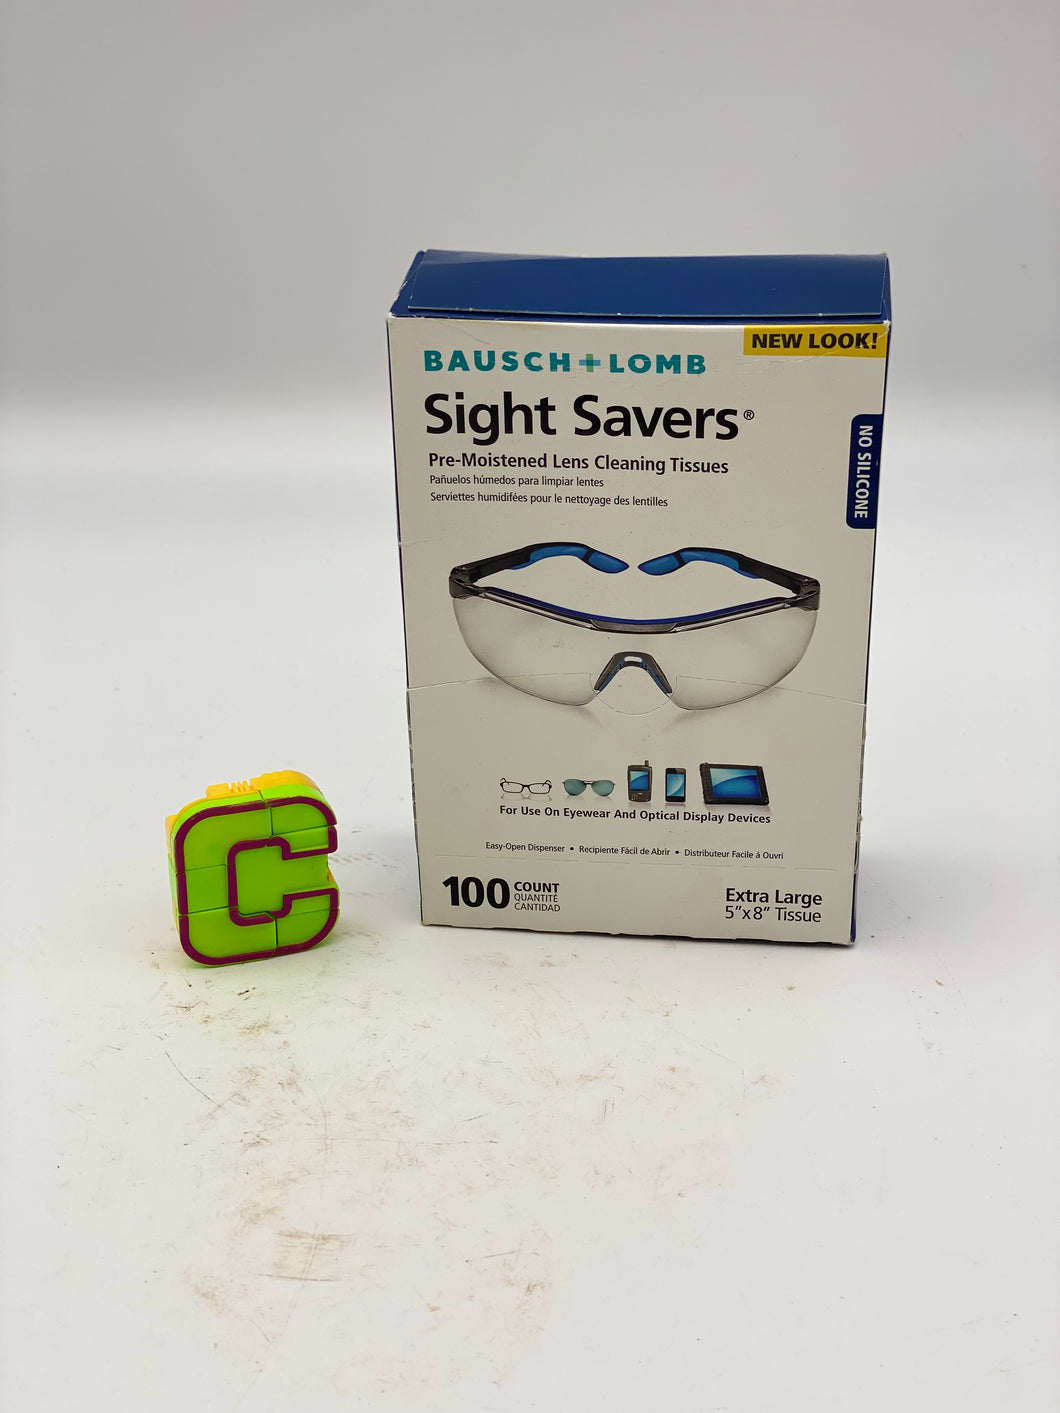 Bausch & Lomb Sight Savers Pre-Moistened Lens Cleaning Tissues, 100 Count *Lot of (2)* (New)